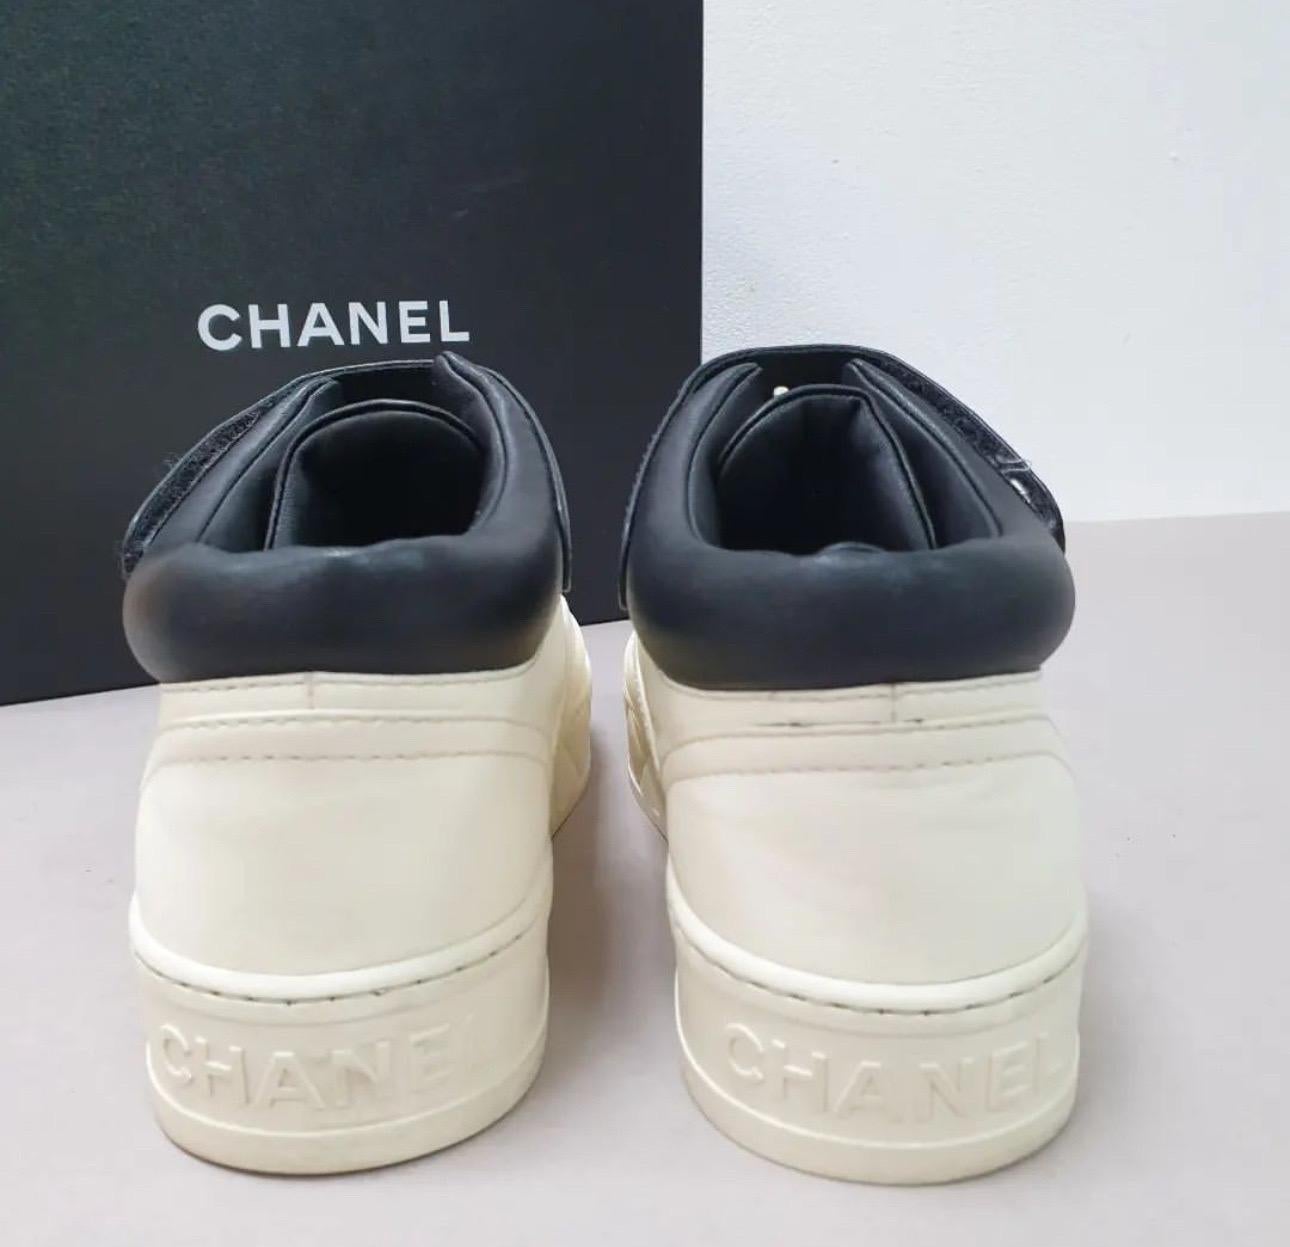 Chanel lambskin leather high-top sneakers in white with a signature metal logo on the black velcro closure, rubber trim, round-toes, platform, and lace-up.
Sz.39
Condition is very good. 
No box. No dust bag.